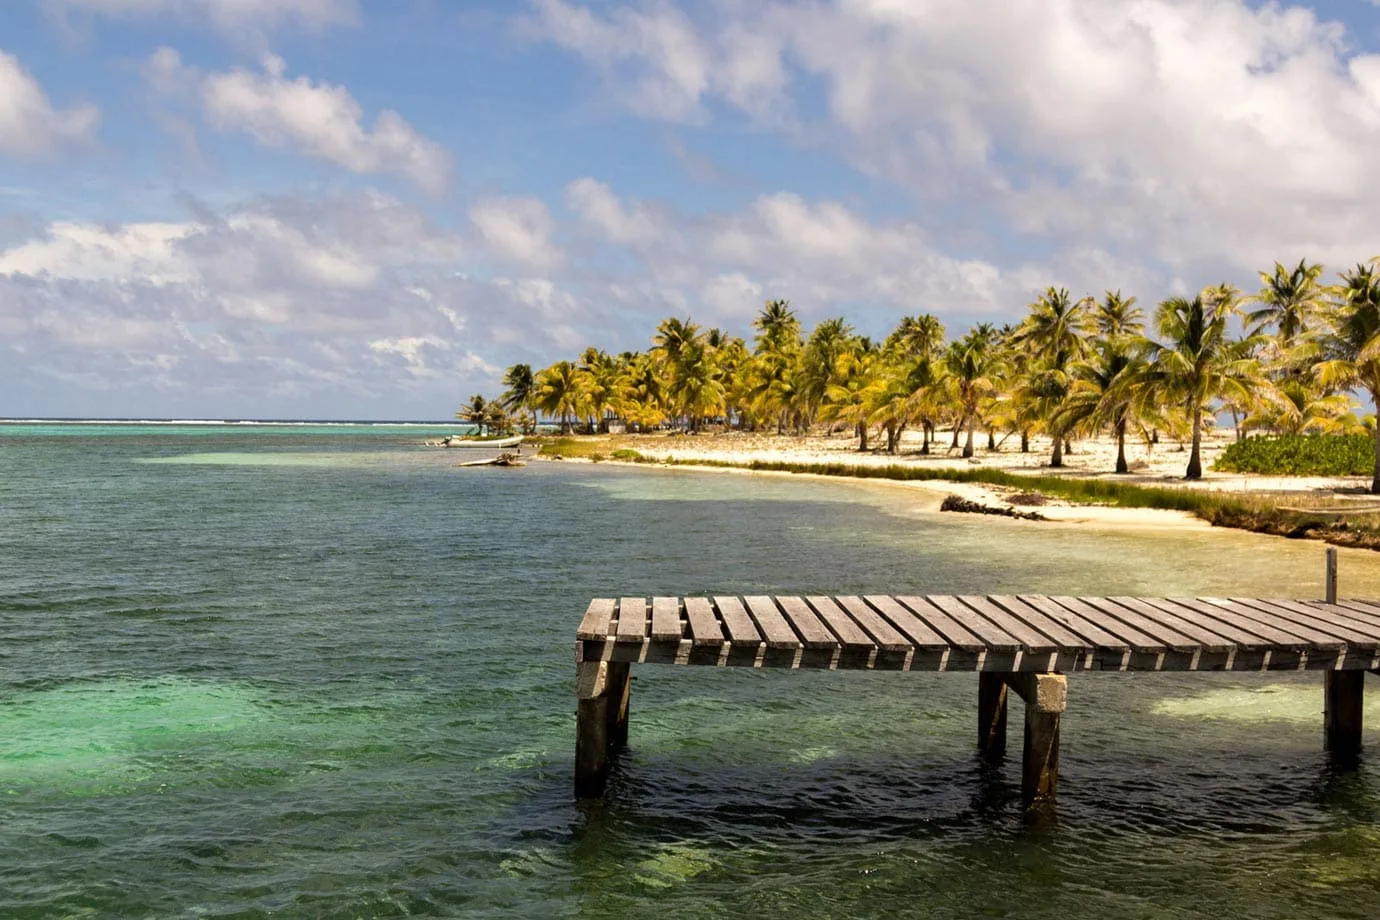 Long Caye, 40kms off the coast of Belize, was simply stunning